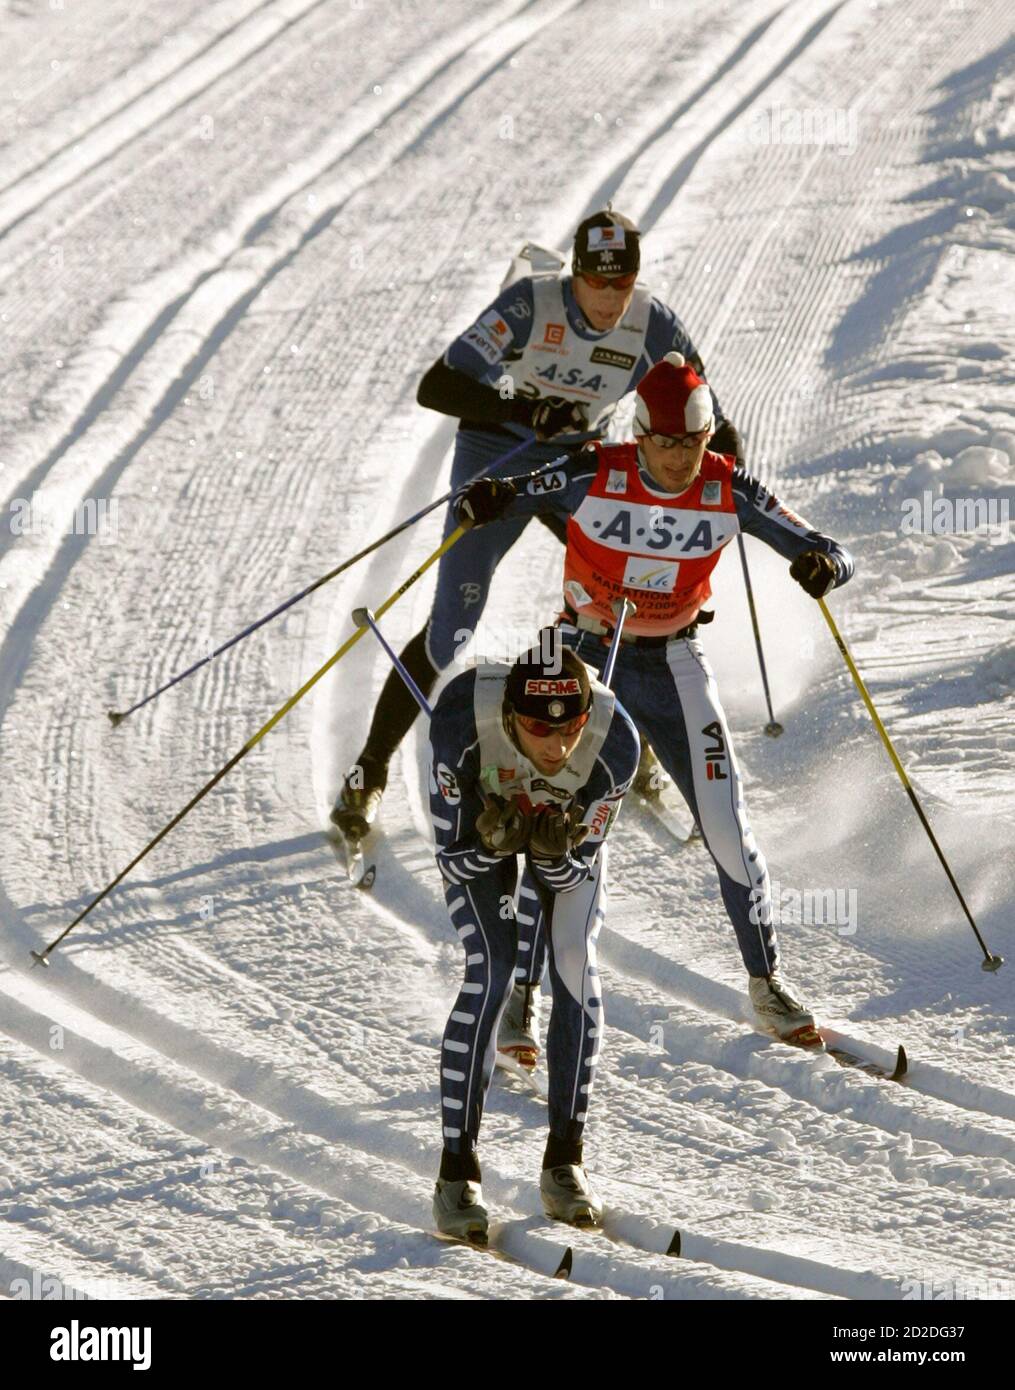 Italy's Marco Cattaneo (front), his team mate Tullio Grandelis and  Estonia's Raul Olle (back) compete during the 39th Jizerska 50 km World Cup  marathon in Bedrichov, near northern Czech town of Liberec